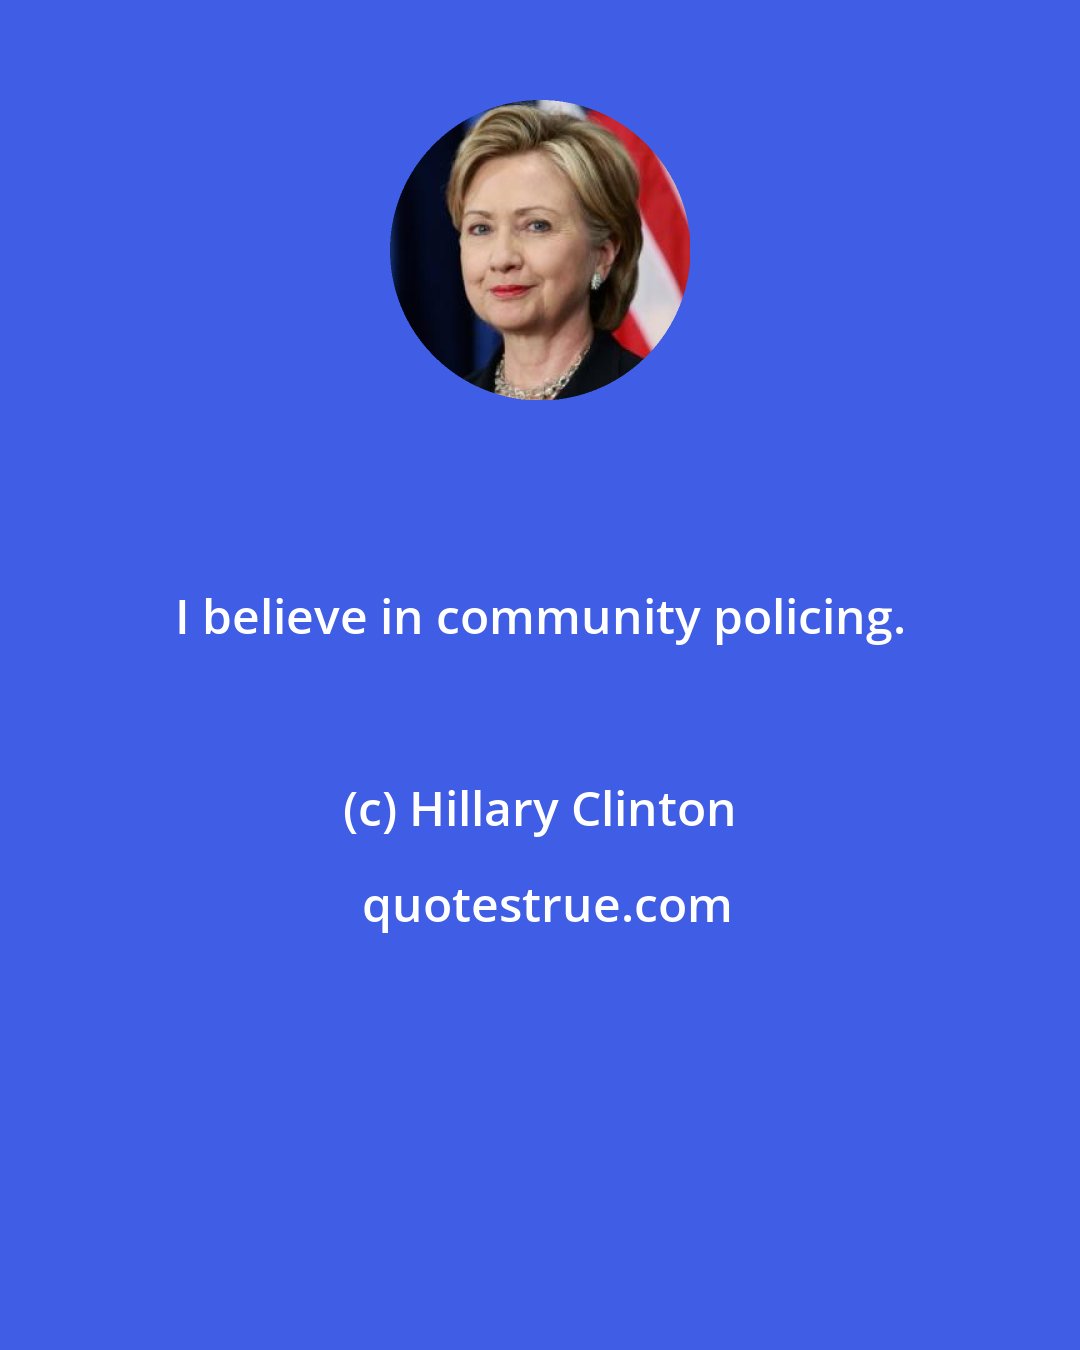 Hillary Clinton: I believe in community policing.